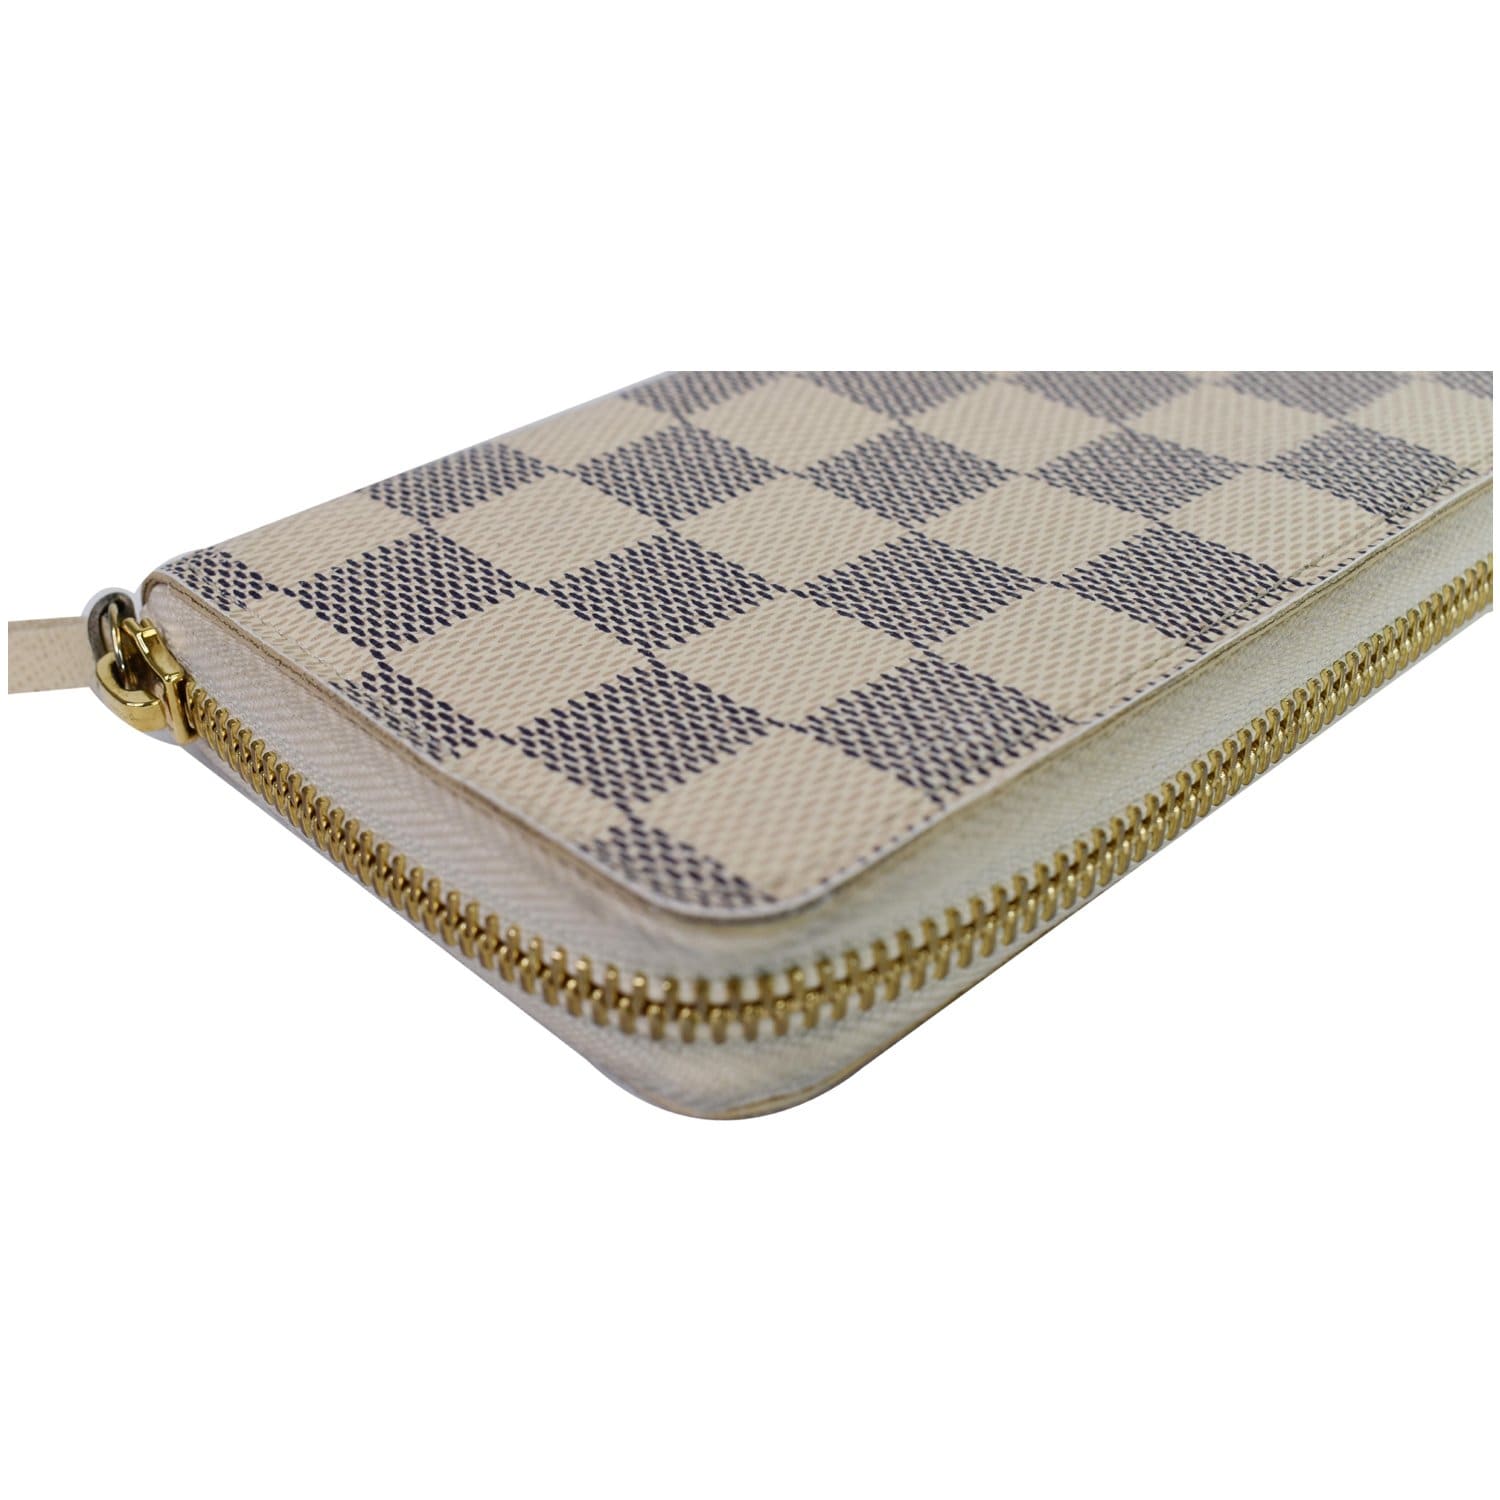 Clemence Wallet Damier Azure Canvas White GHW